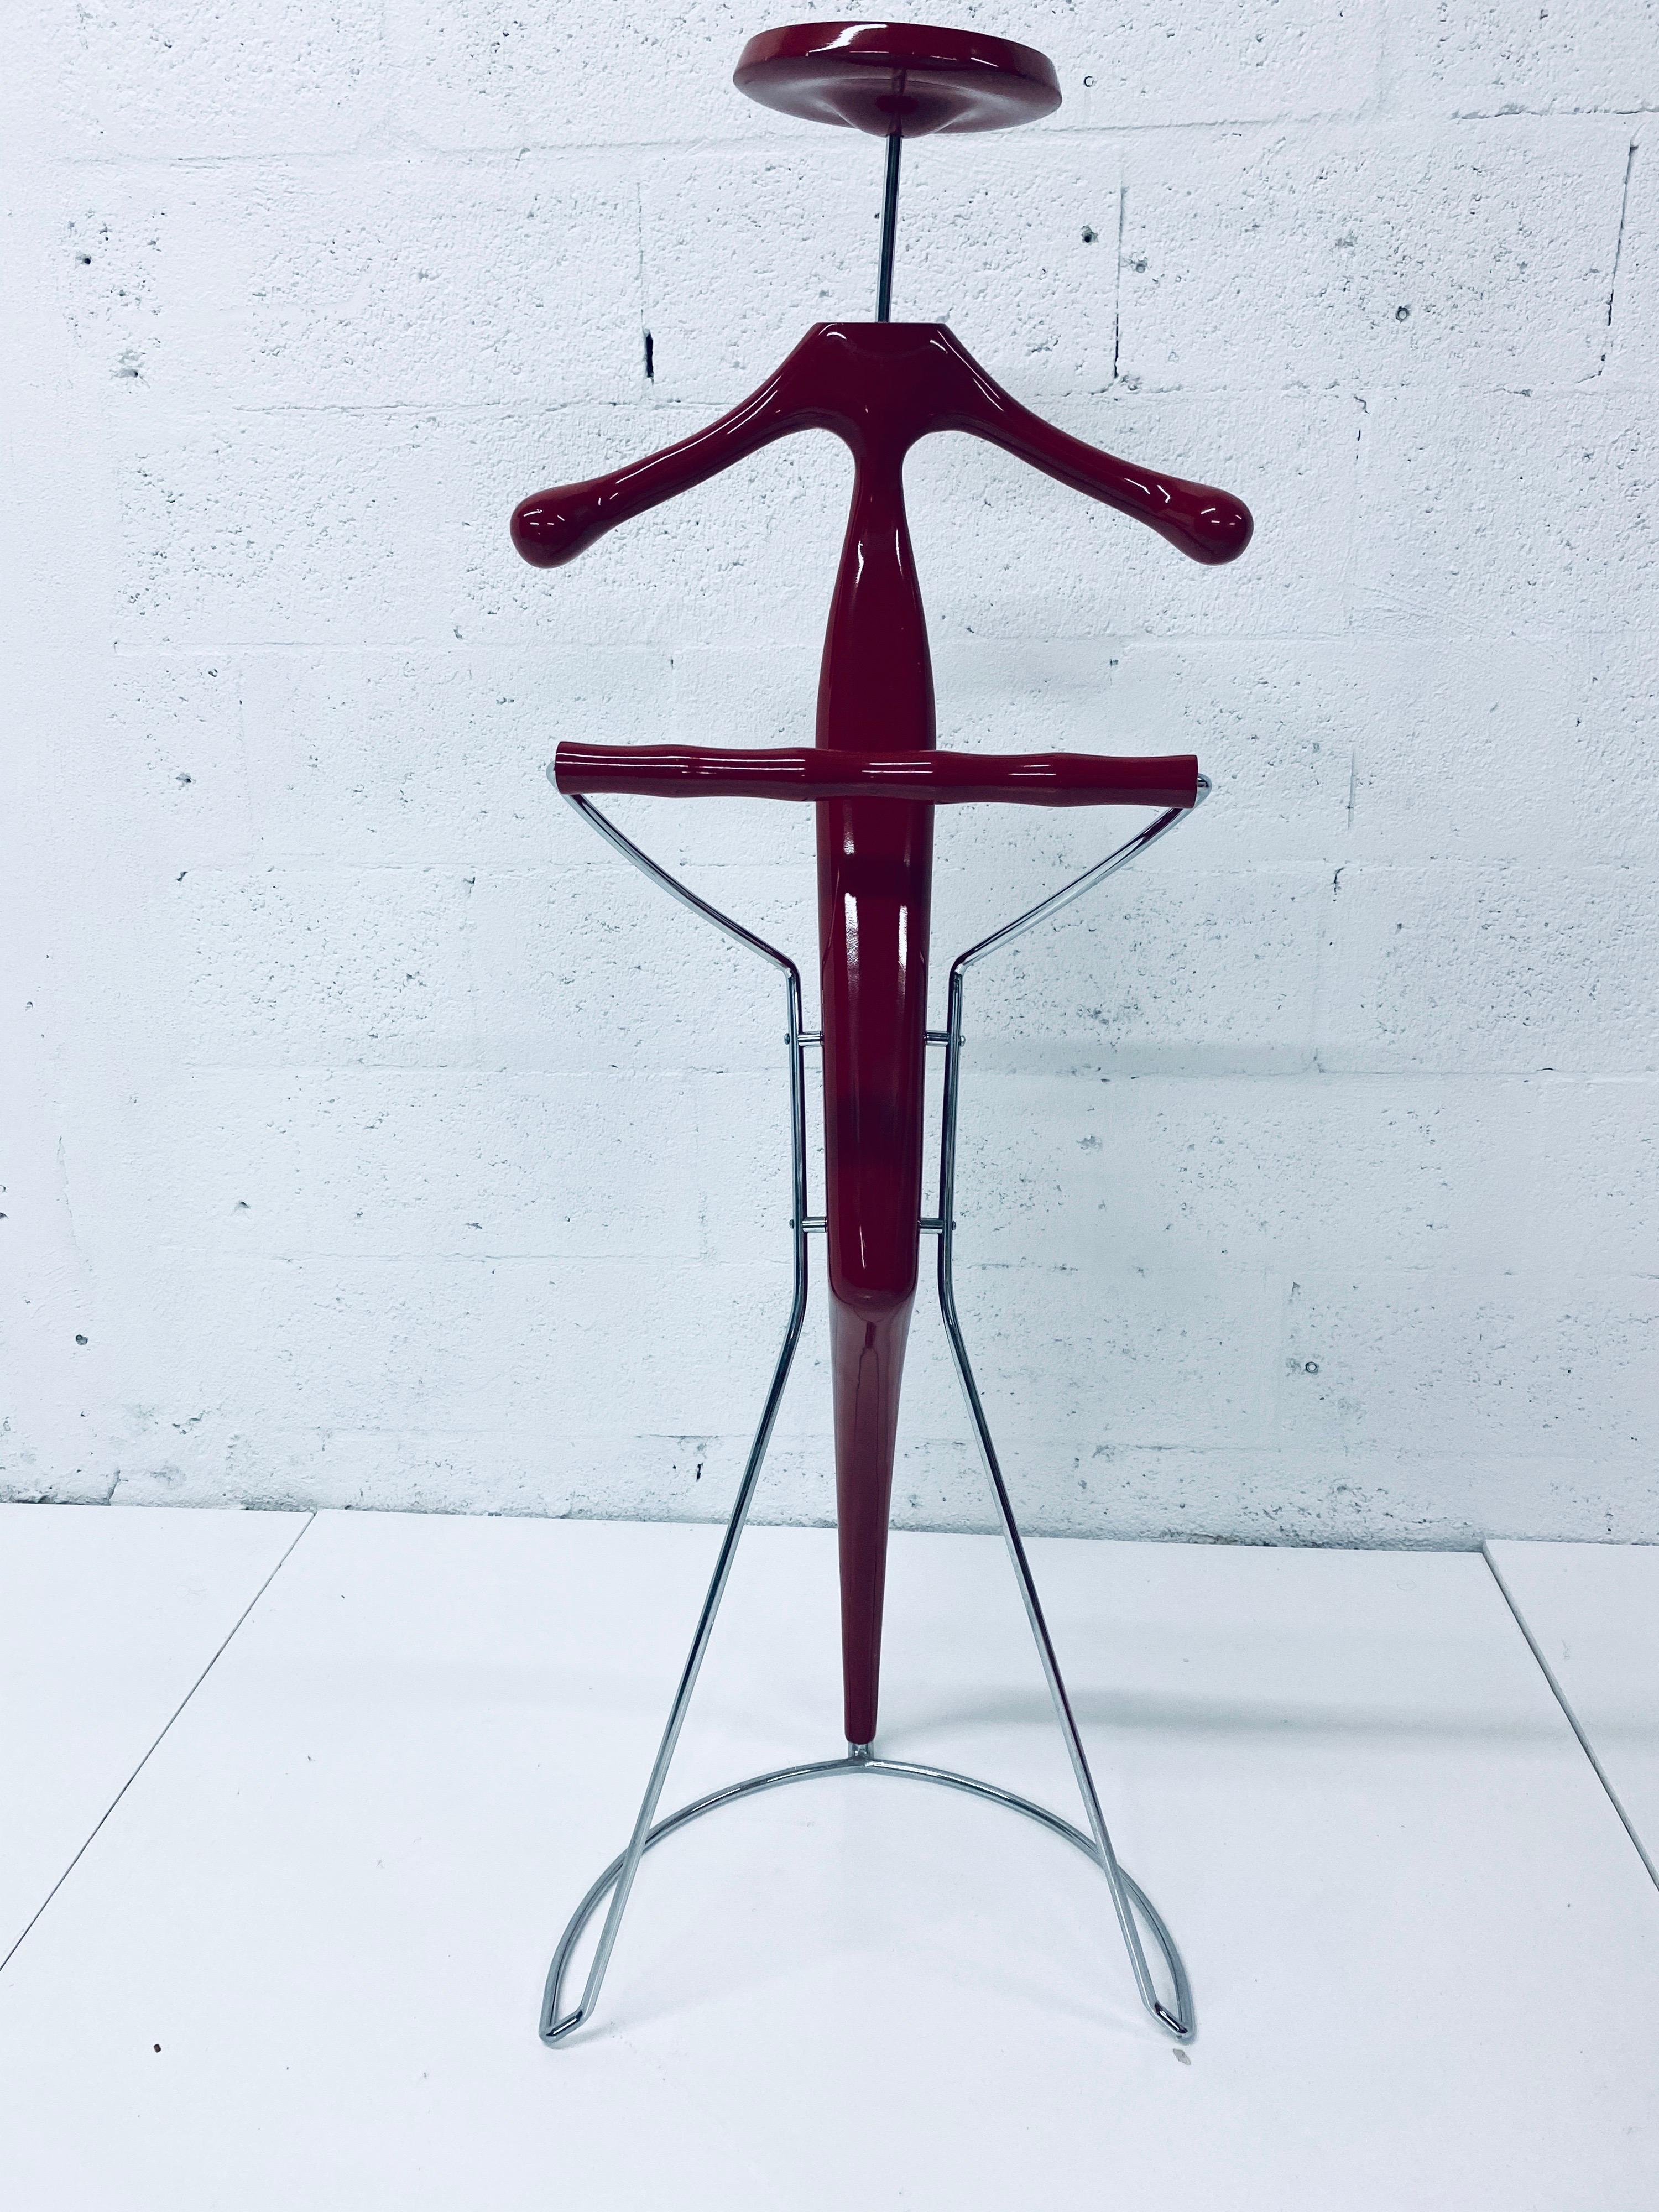 Postmodern, organic red lacquer and chrome accent coat rack or butler valet designed by Italian architectural team Maurizio Marconato and Terry Zappa for Porada. Keeps clothes shapely, offers aeration for leather jacket, suit jacket, blazer, blouse,